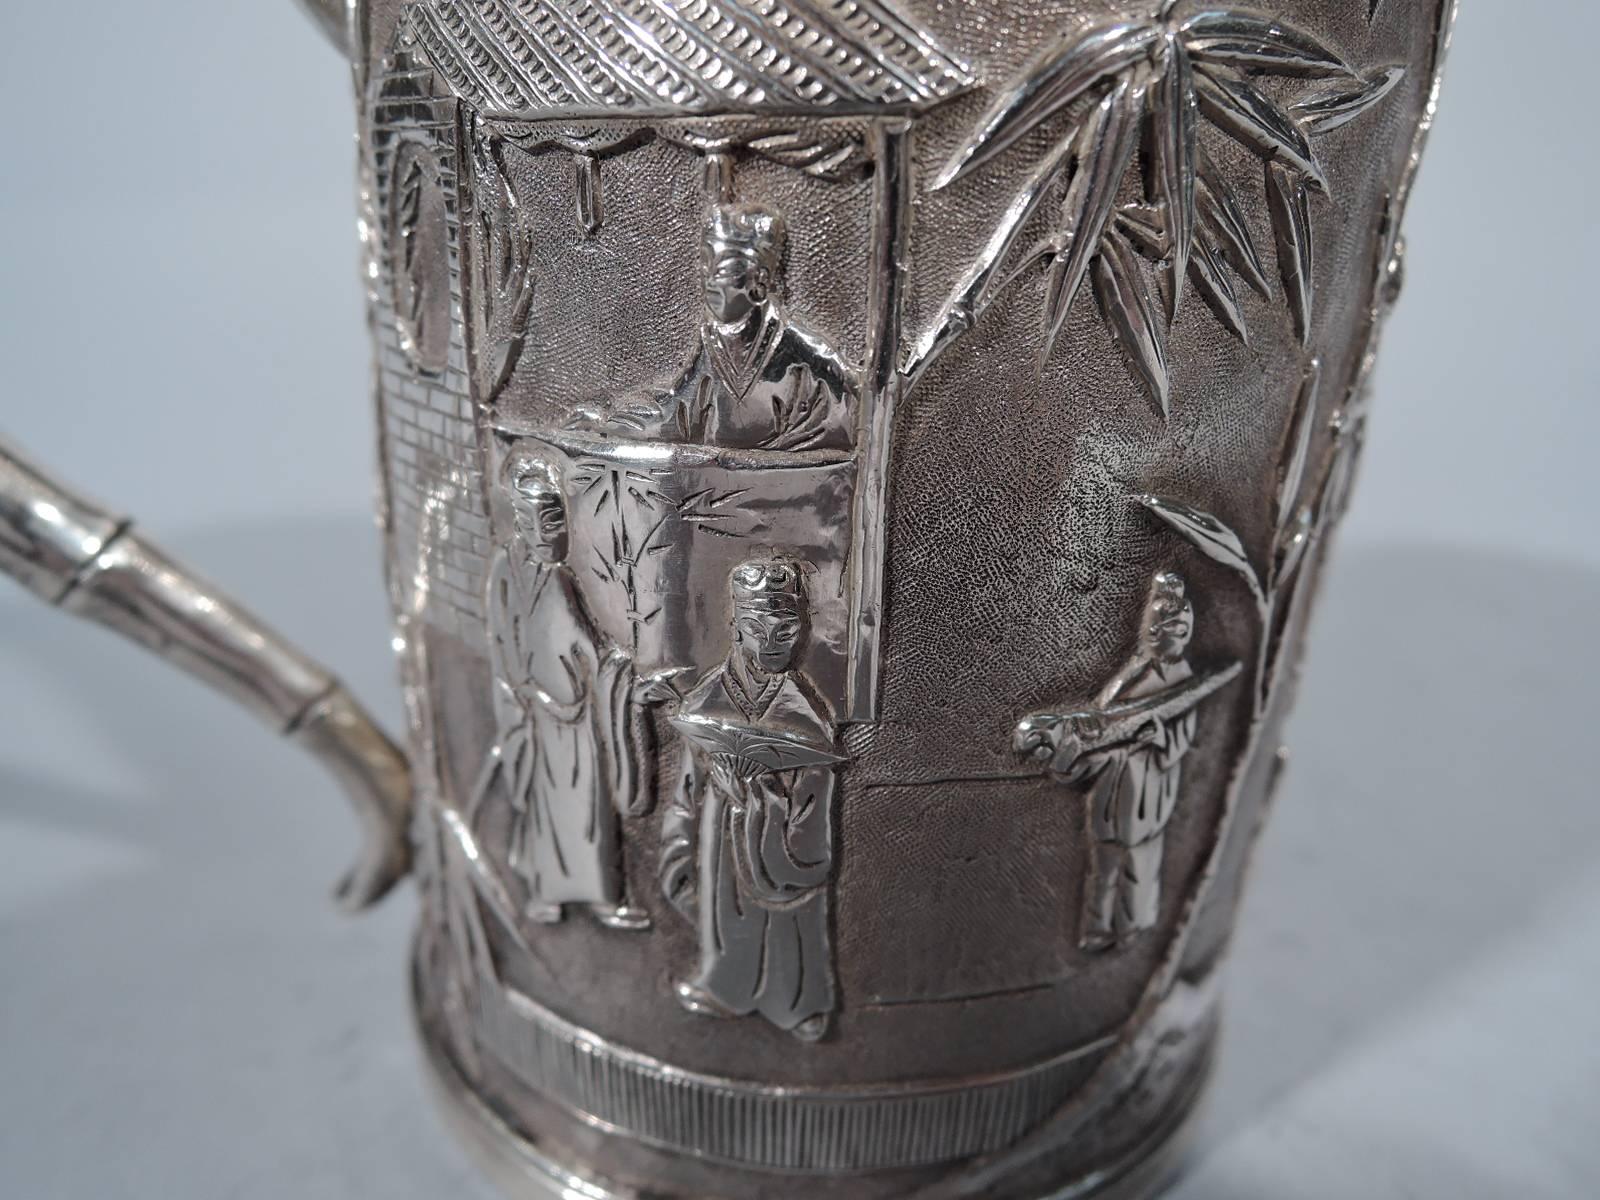 Chinese Export Silver Christening Mug with Exotic Scenes 1